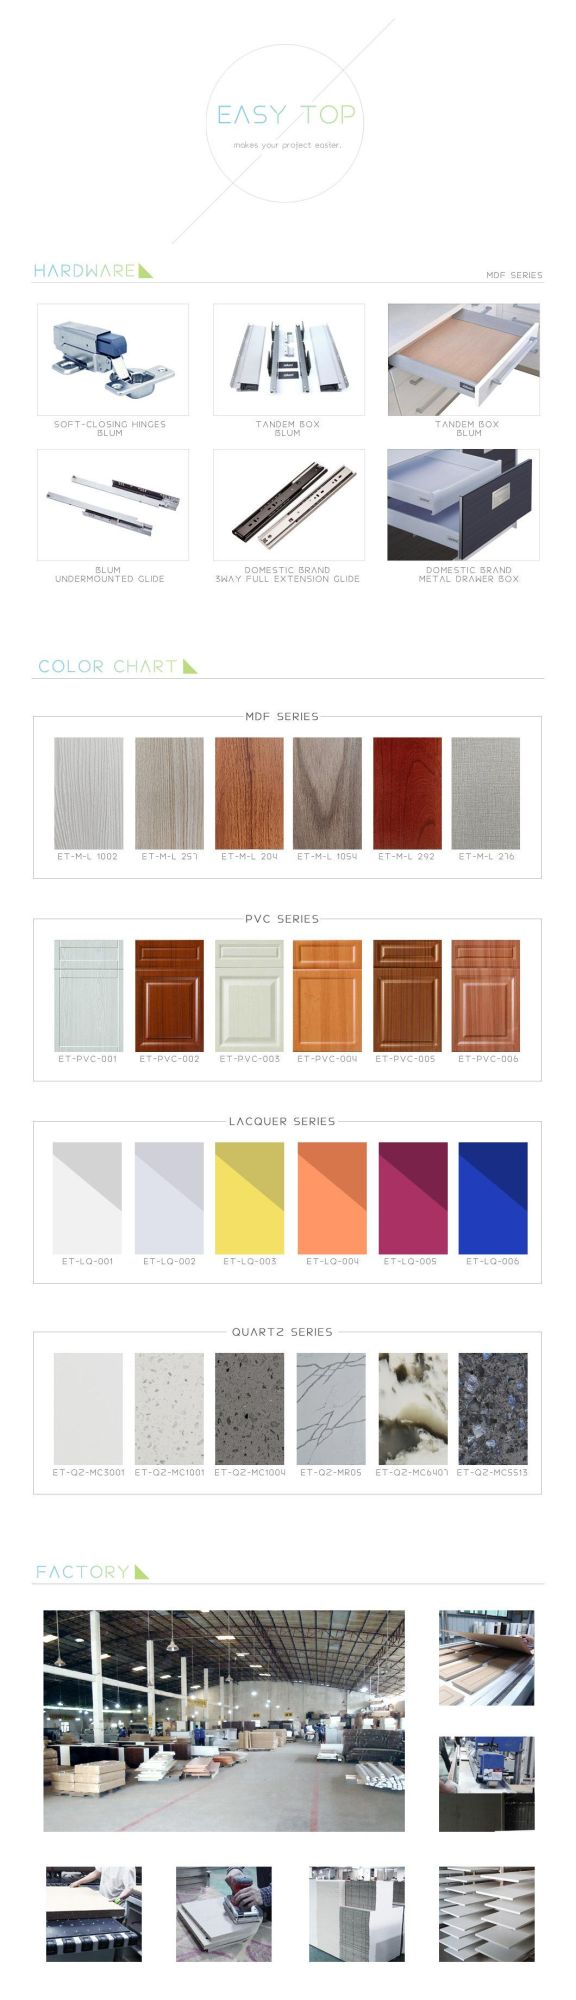 High Quality Open Frame Flat Slab Pantry White Shaker Kitchen Cabinets